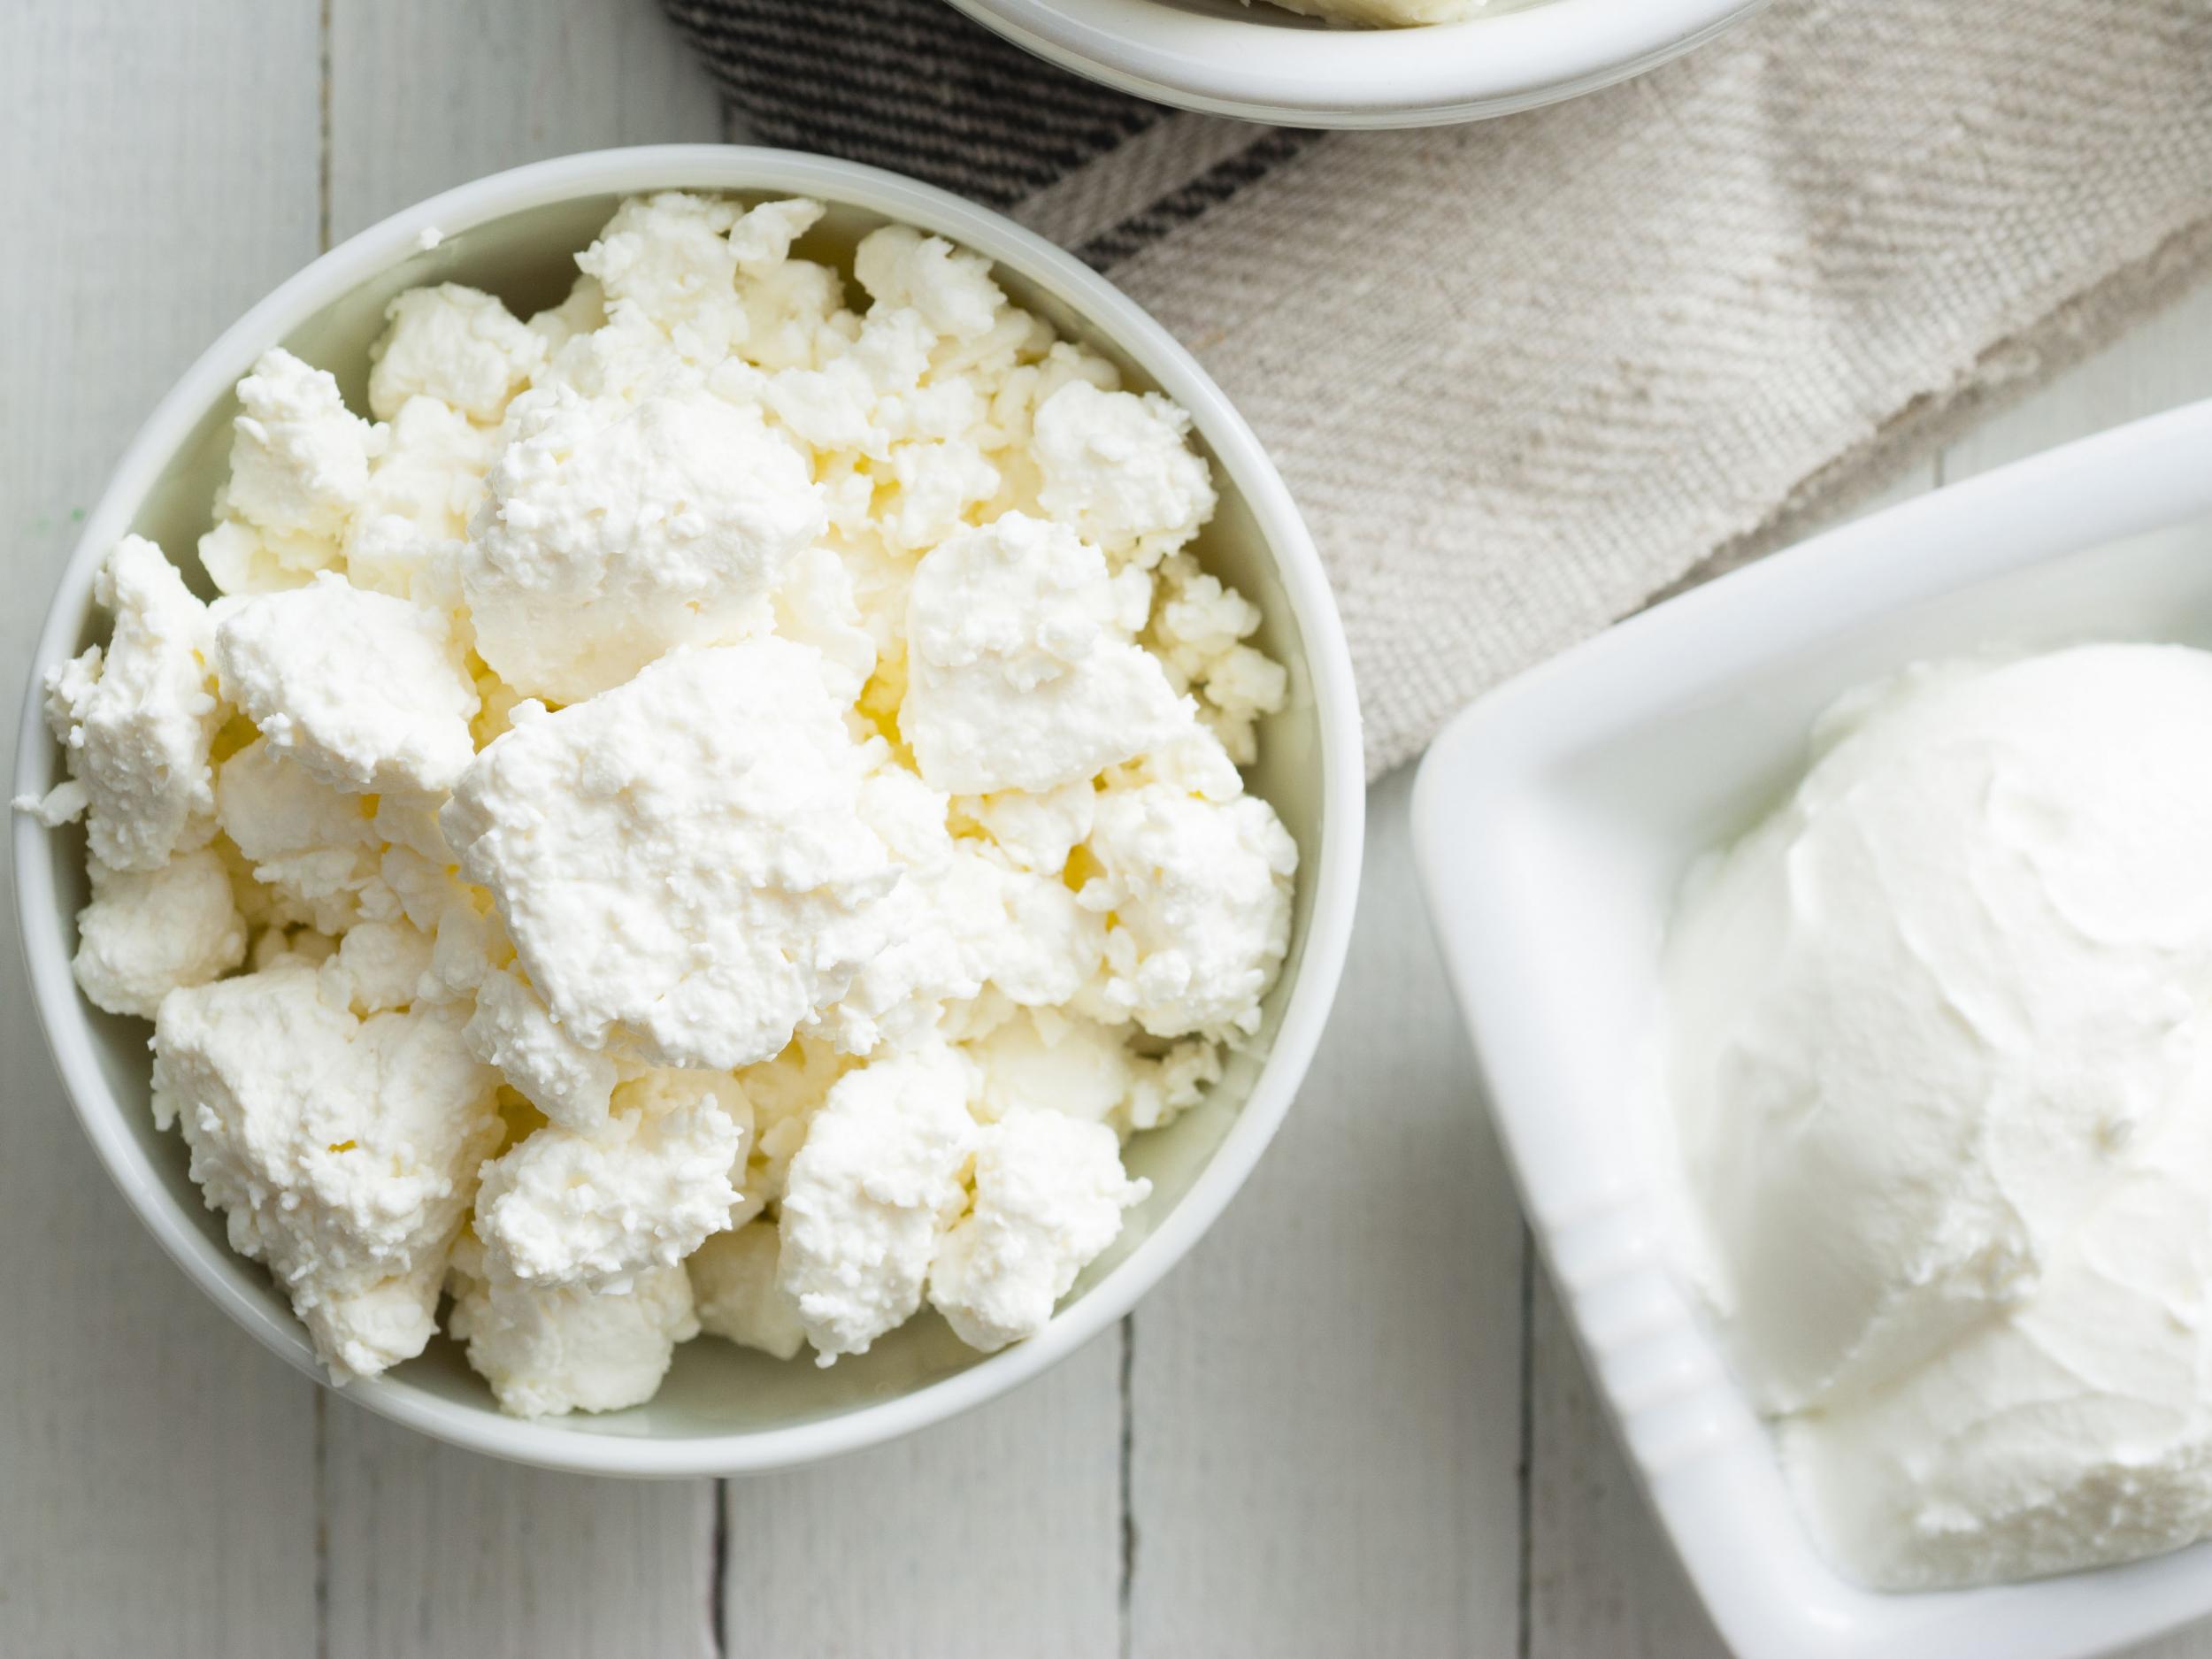 During World War I, cottage cheese was promoted as a protein substitute